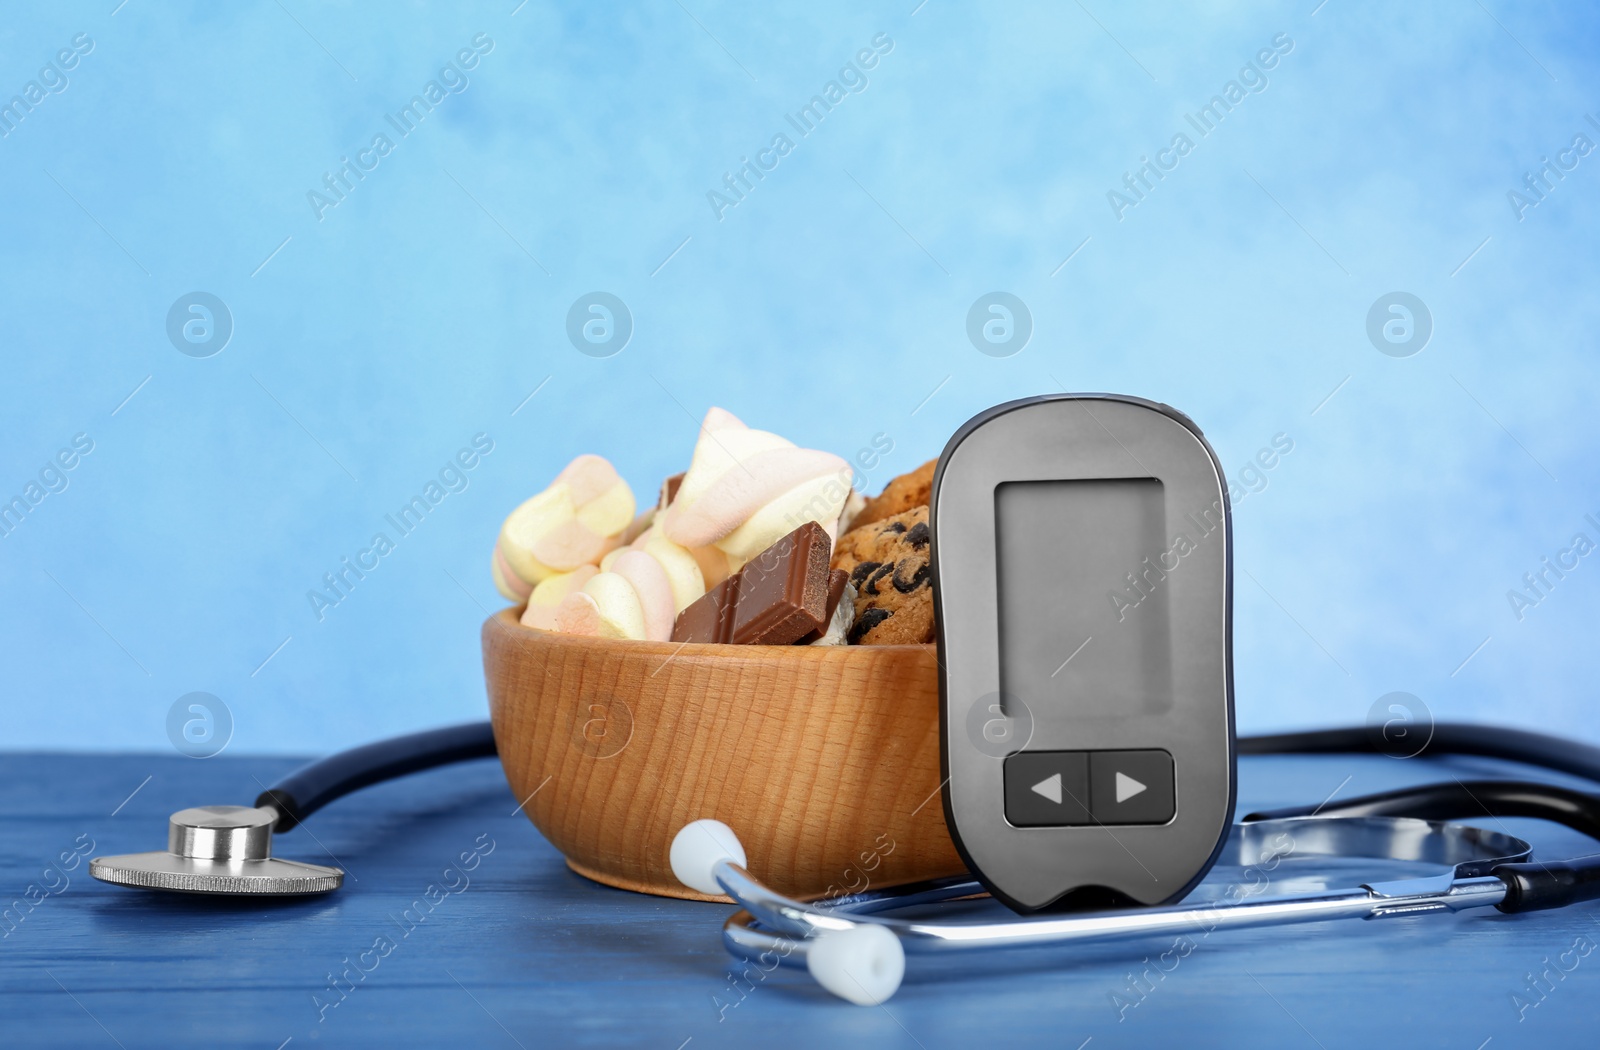 Photo of Digital glucometer, stethoscope and sweets on table. Diabetes concept